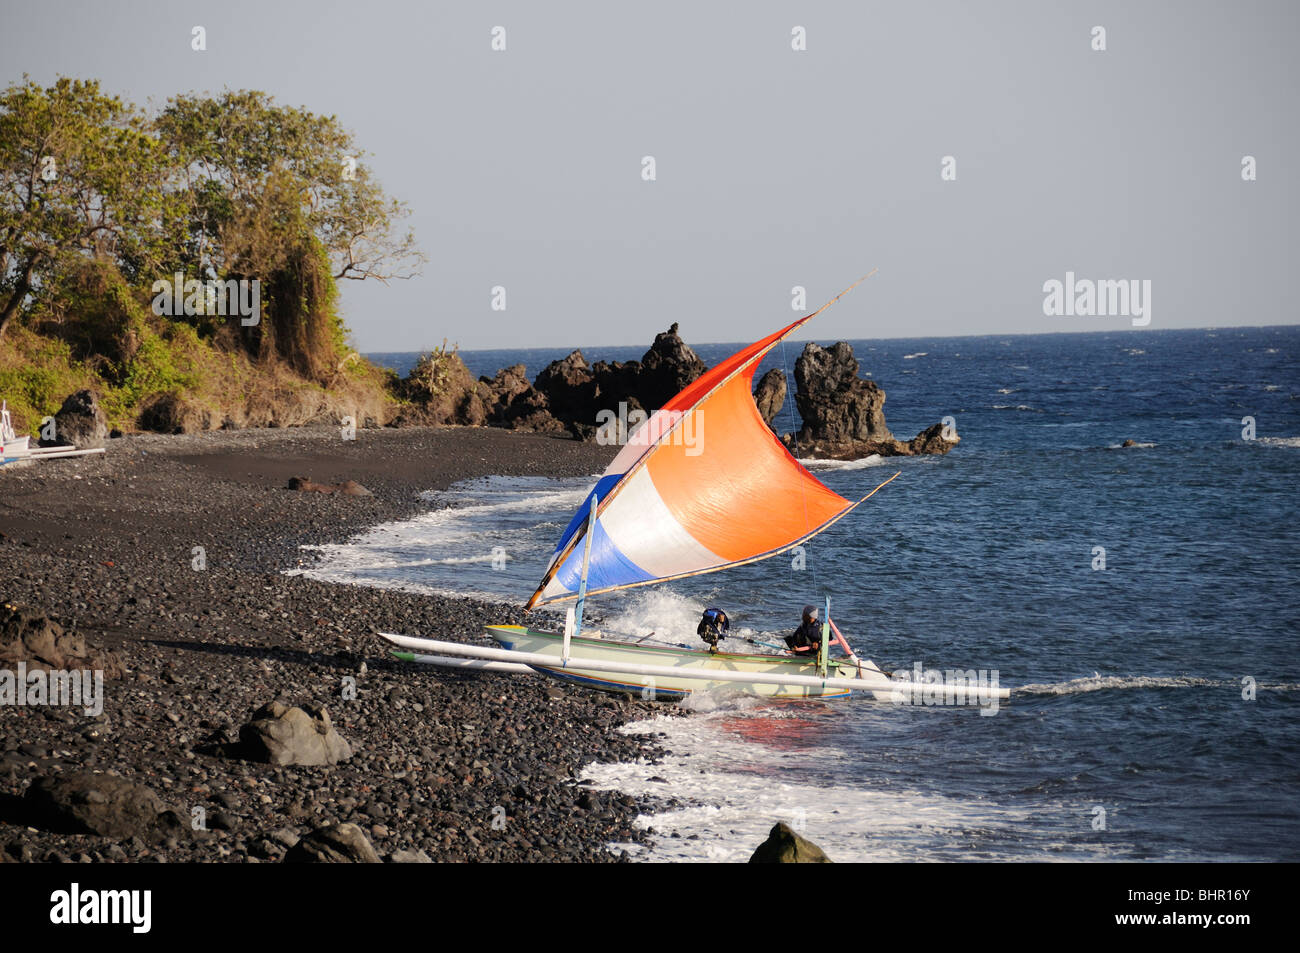 Outrigger-Canoe sailing at vulcanic beach, Bali, Indonesia, Indo-Pacific Ocean Stock Photo